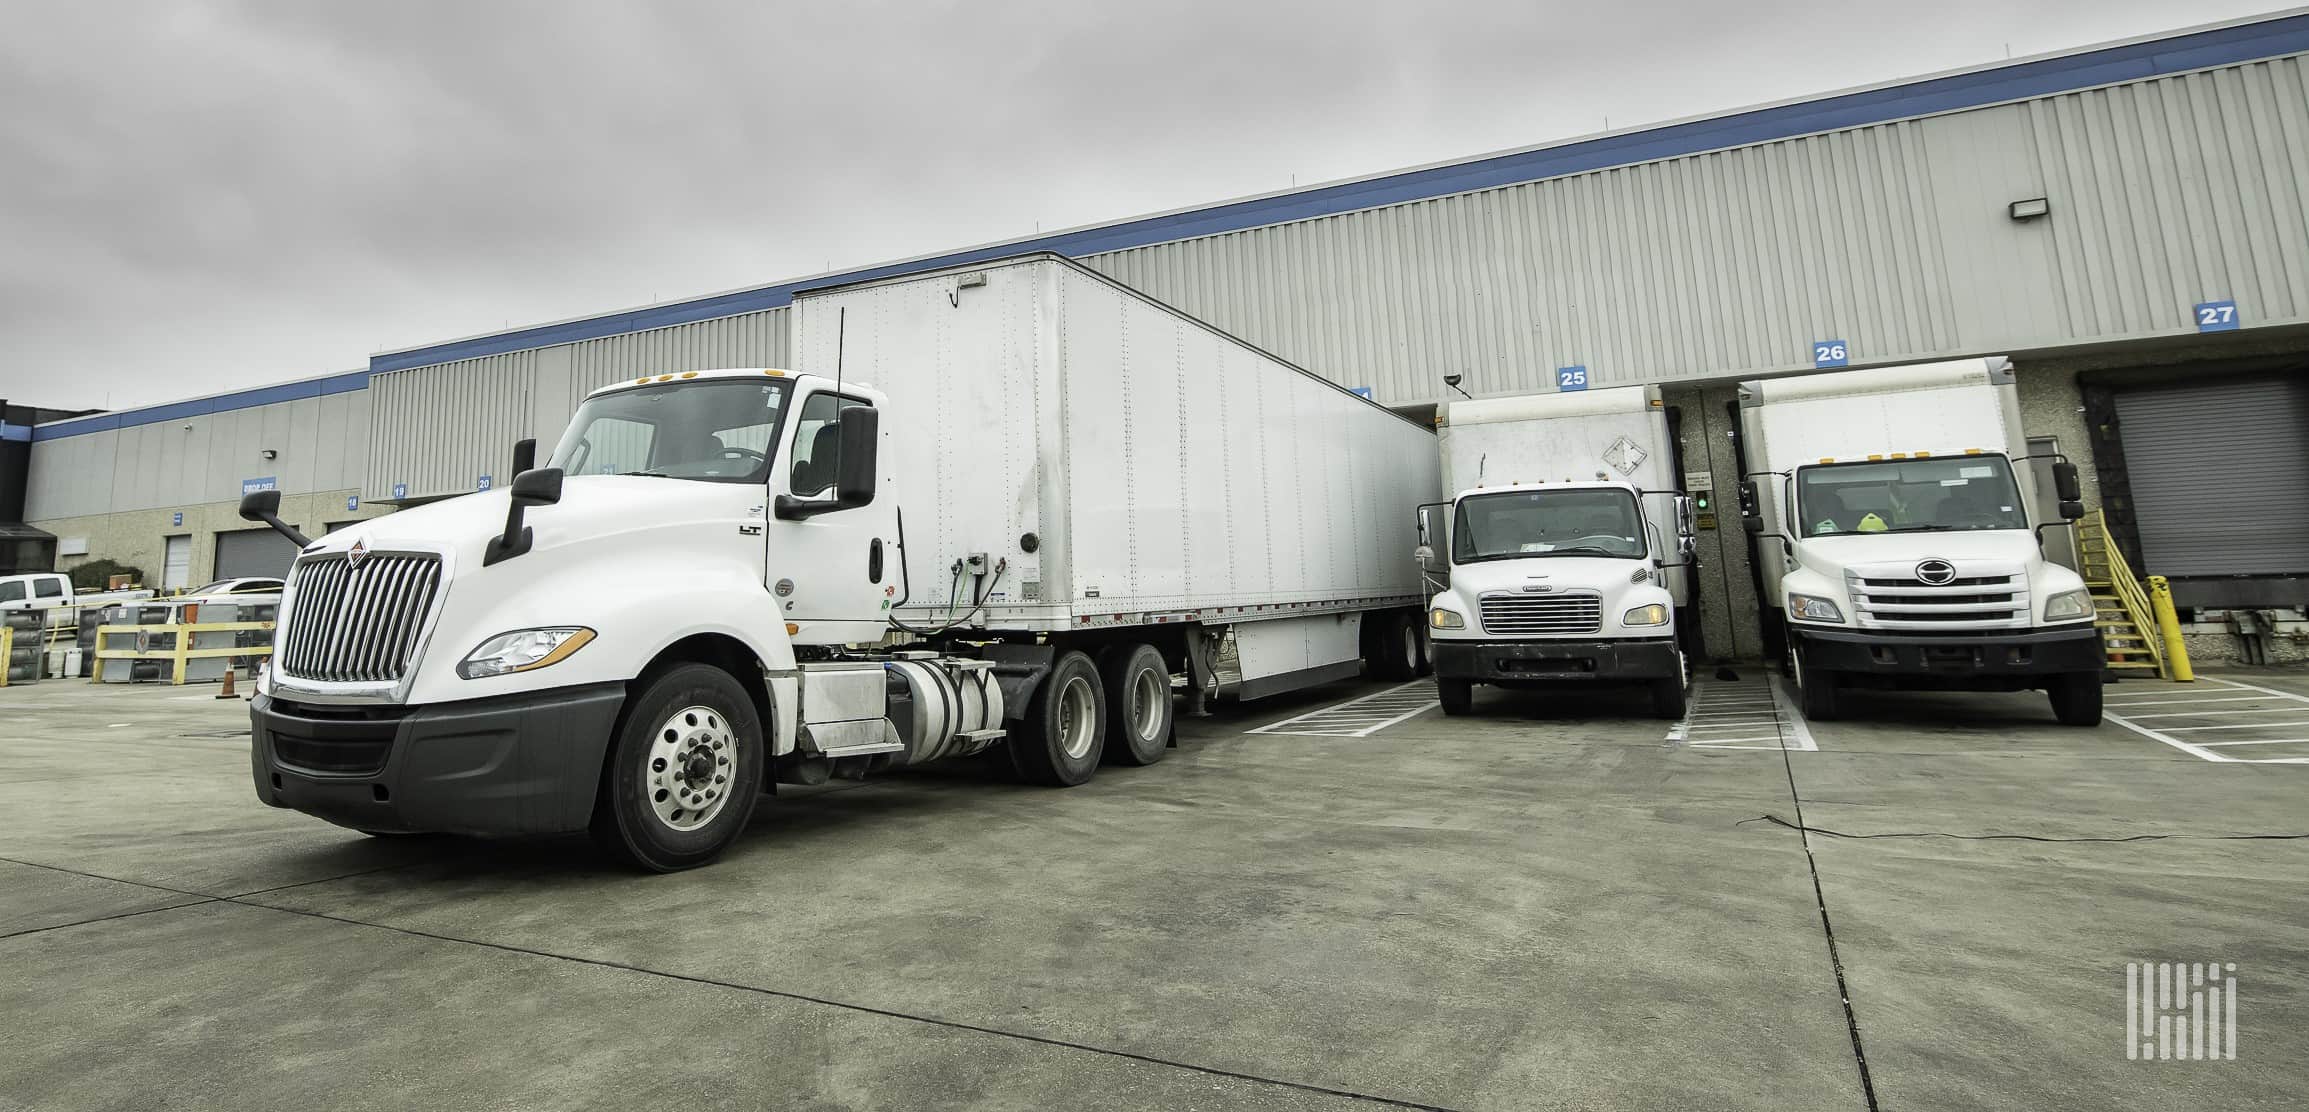 6 tips to choose the best trucking company for new drivers